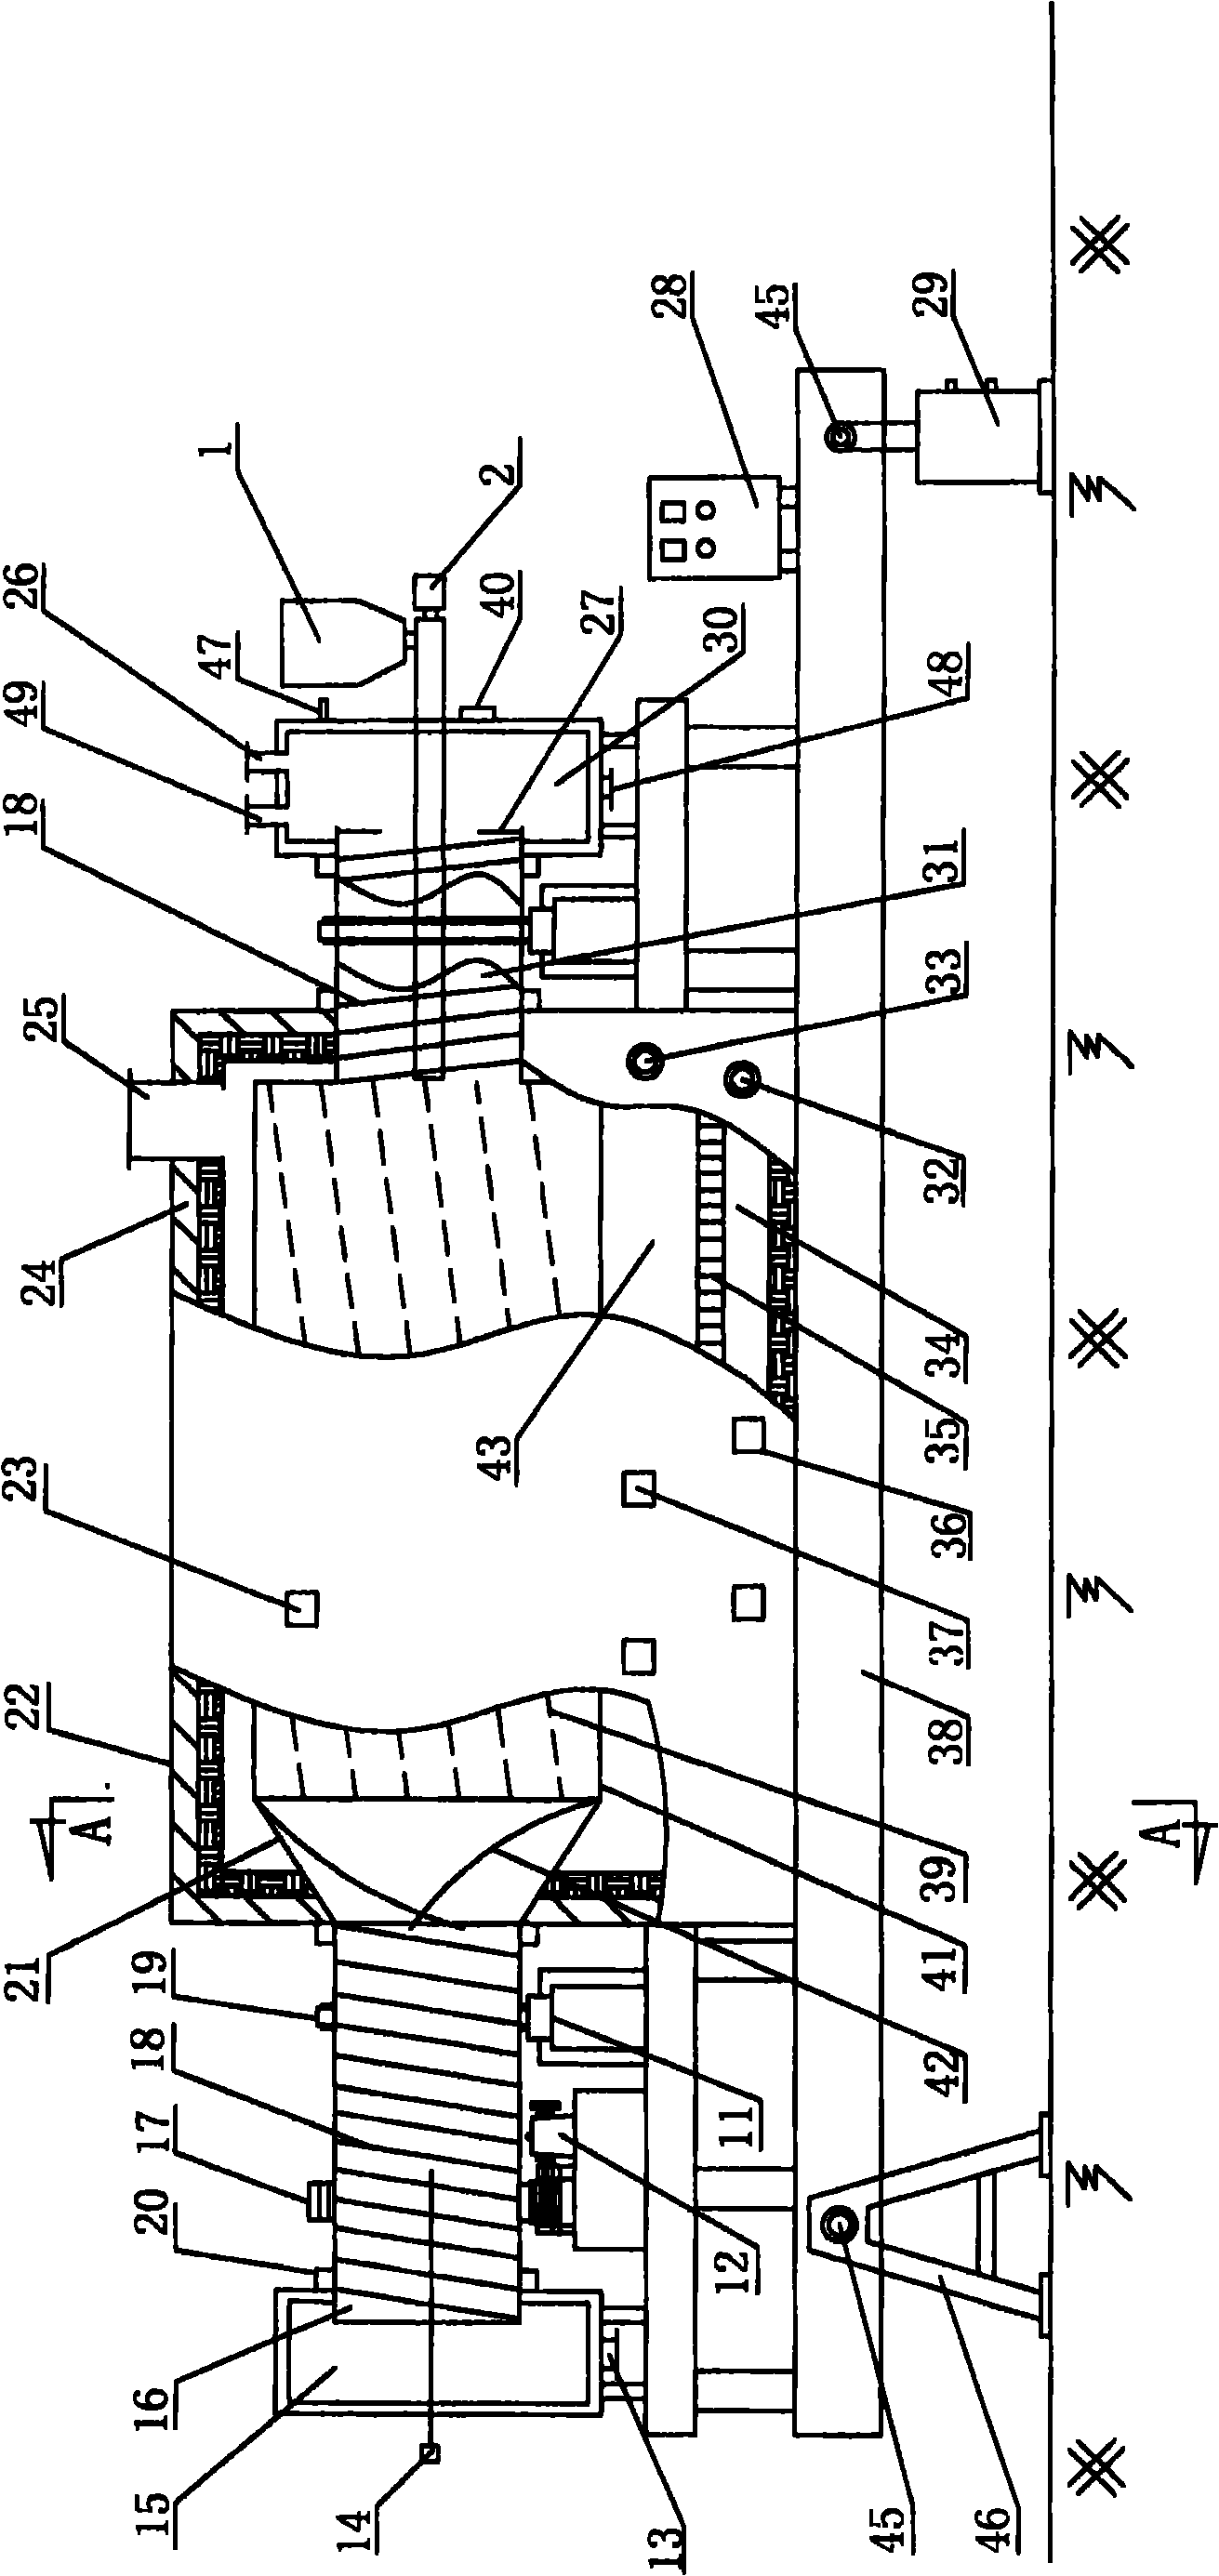 Preparation method and device of organic soil conditioner